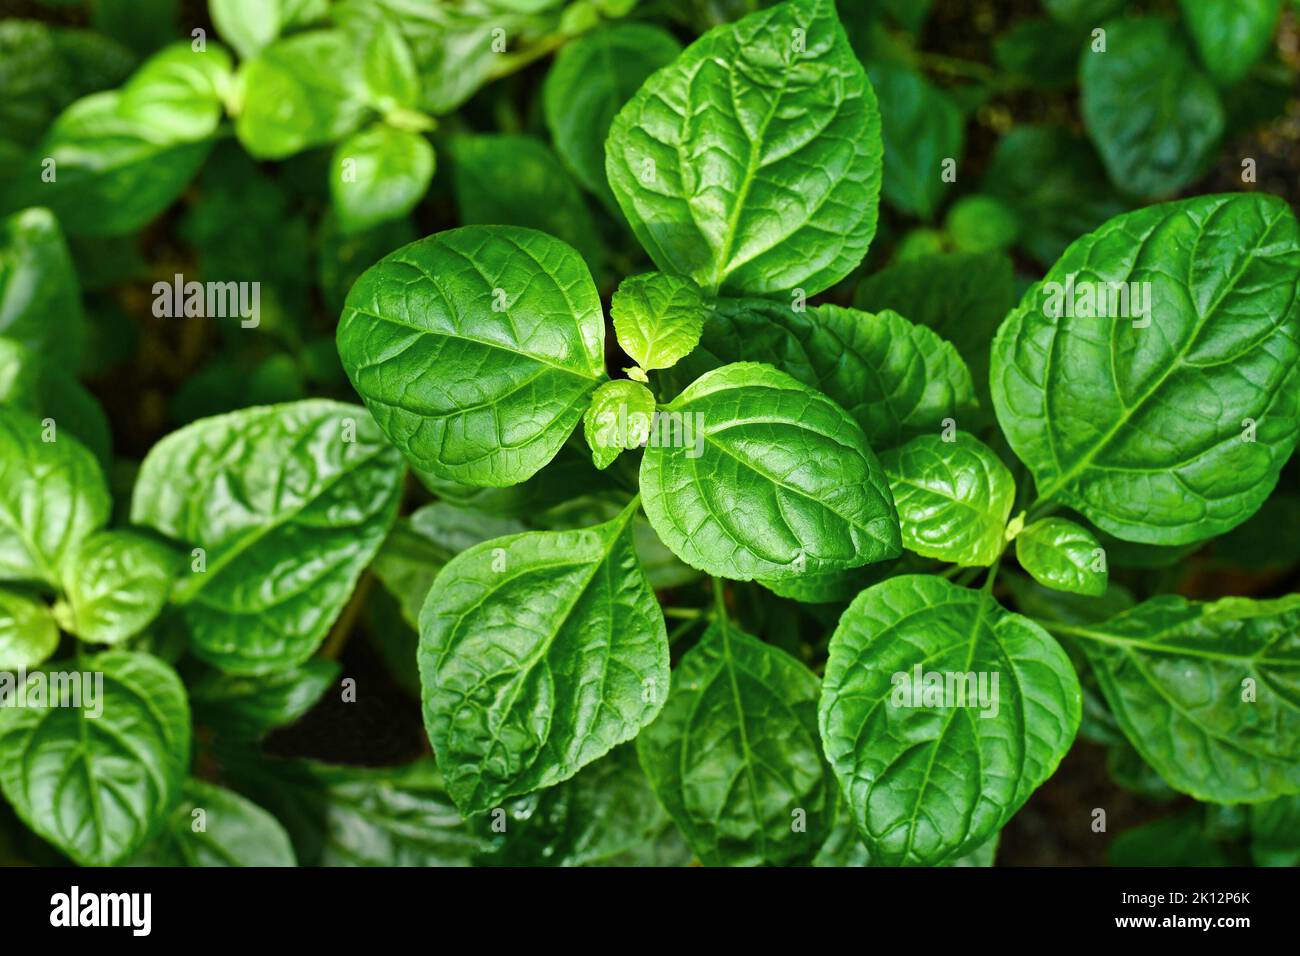 Top view of tropical 'Pogostemon Cablin' Patchouli plant, commonly used in perfumes Stock Photo